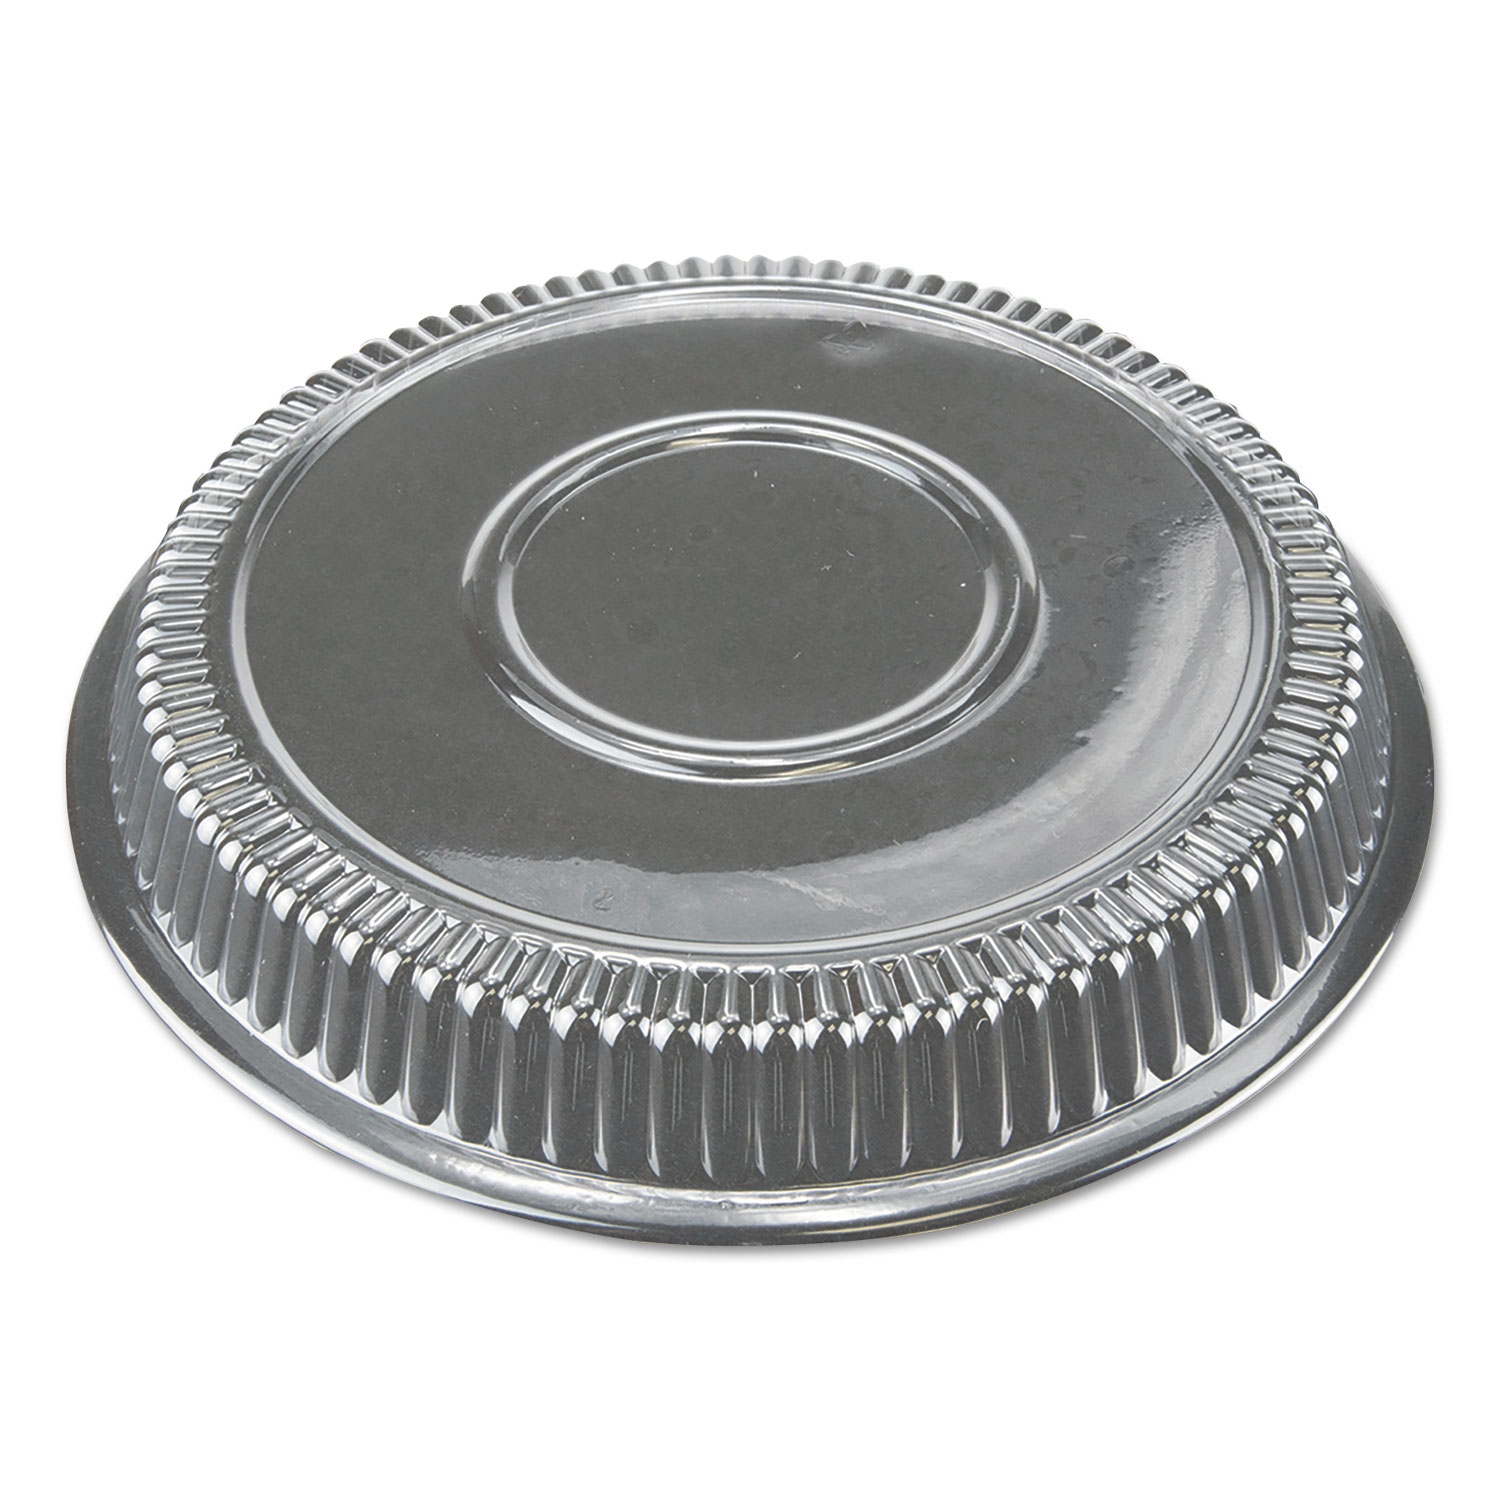  Durable Packaging P290500 Dome Lids for 9 Round Containers, 500/Carton (DPKP290500) 